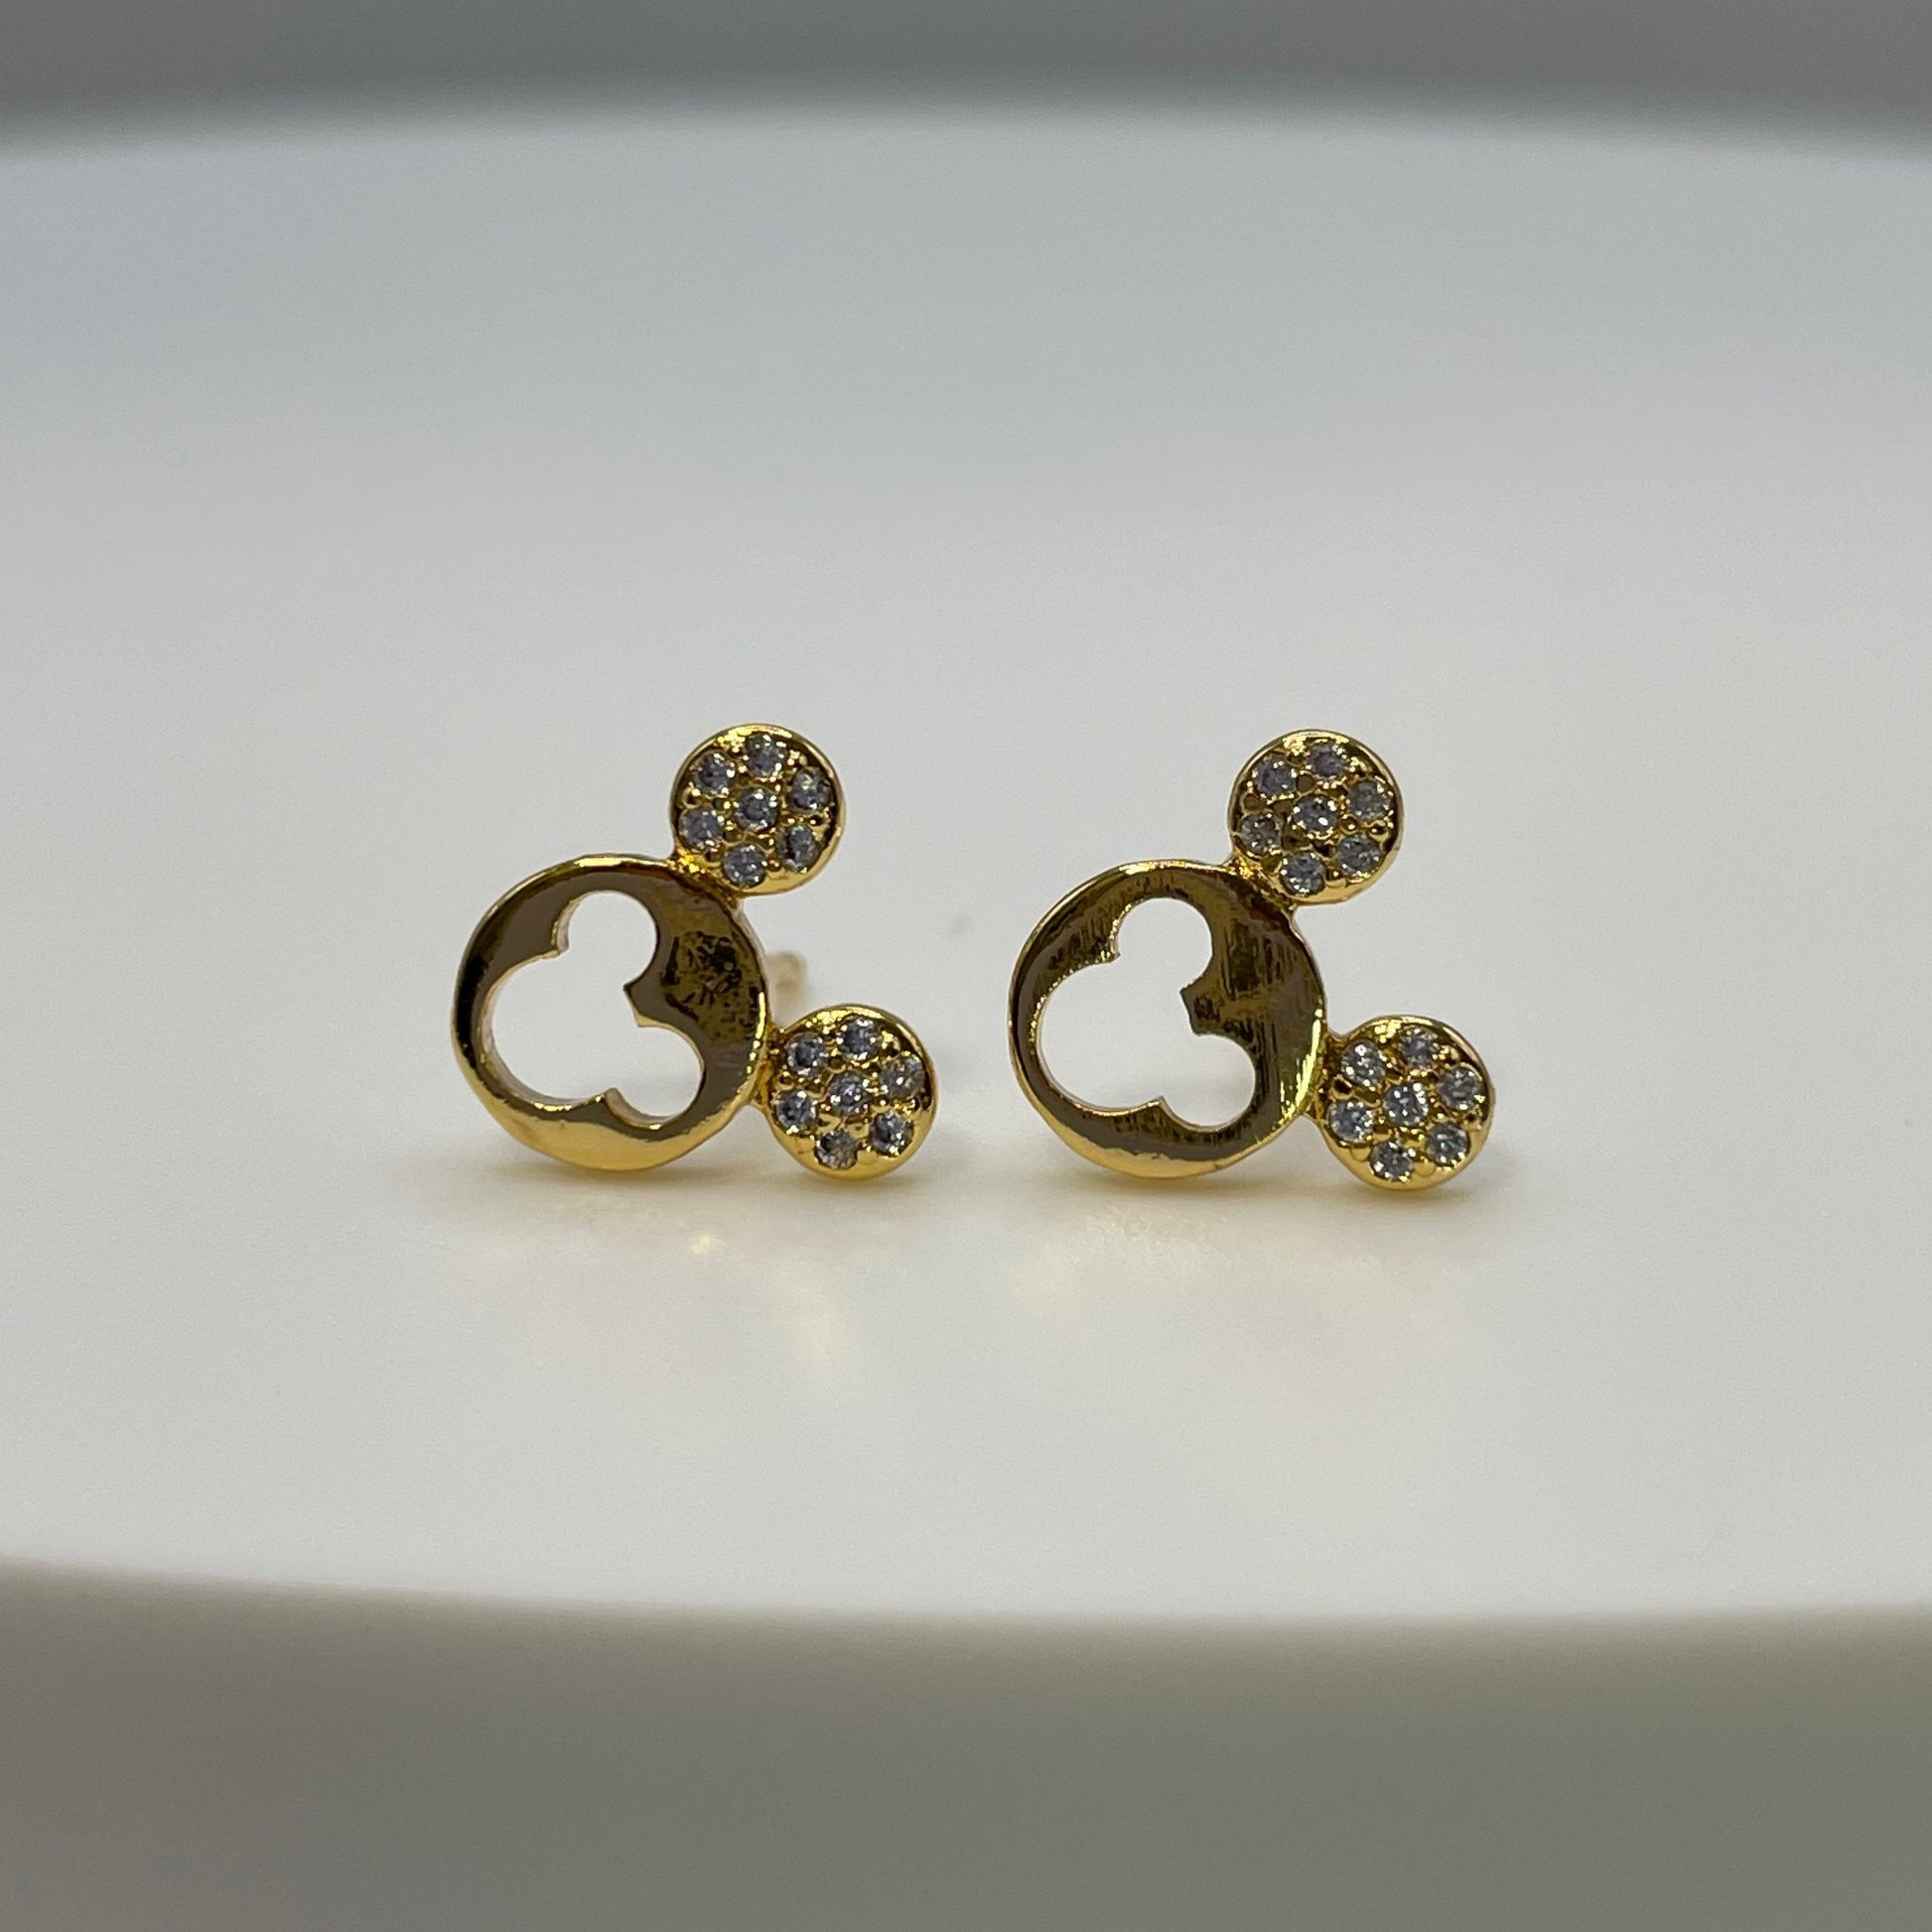 Mickey mouse earrings. Mickey mouse 18k gold plated earrings. Cute micke mouse stud earrings 18k gold plated. Disney mickey mouse earrings. 